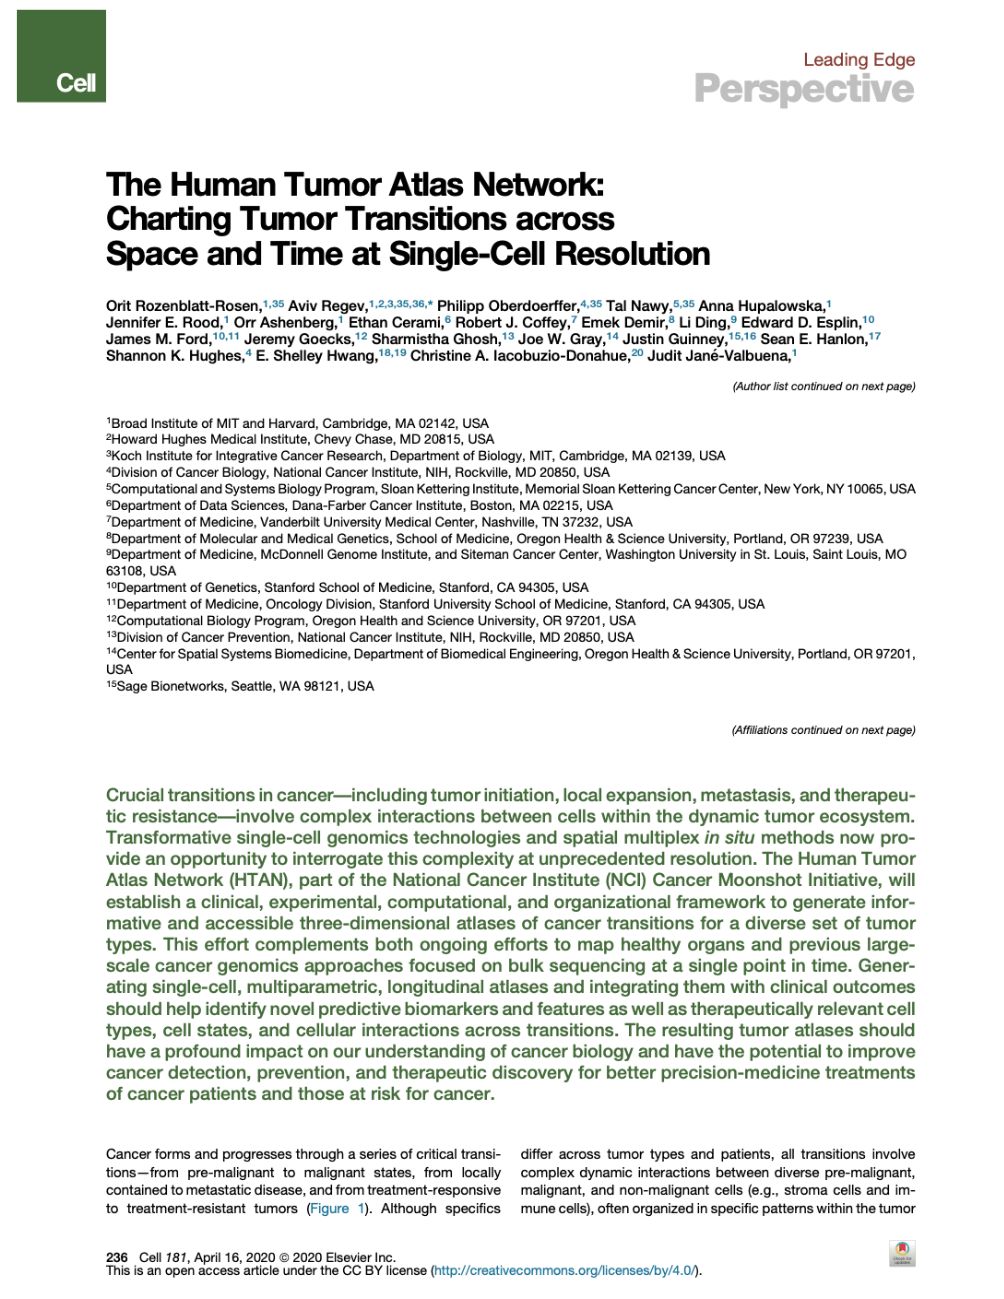 The Human Tumor Atlas Network- charting tumor transitions across space and time at single-cell resolution